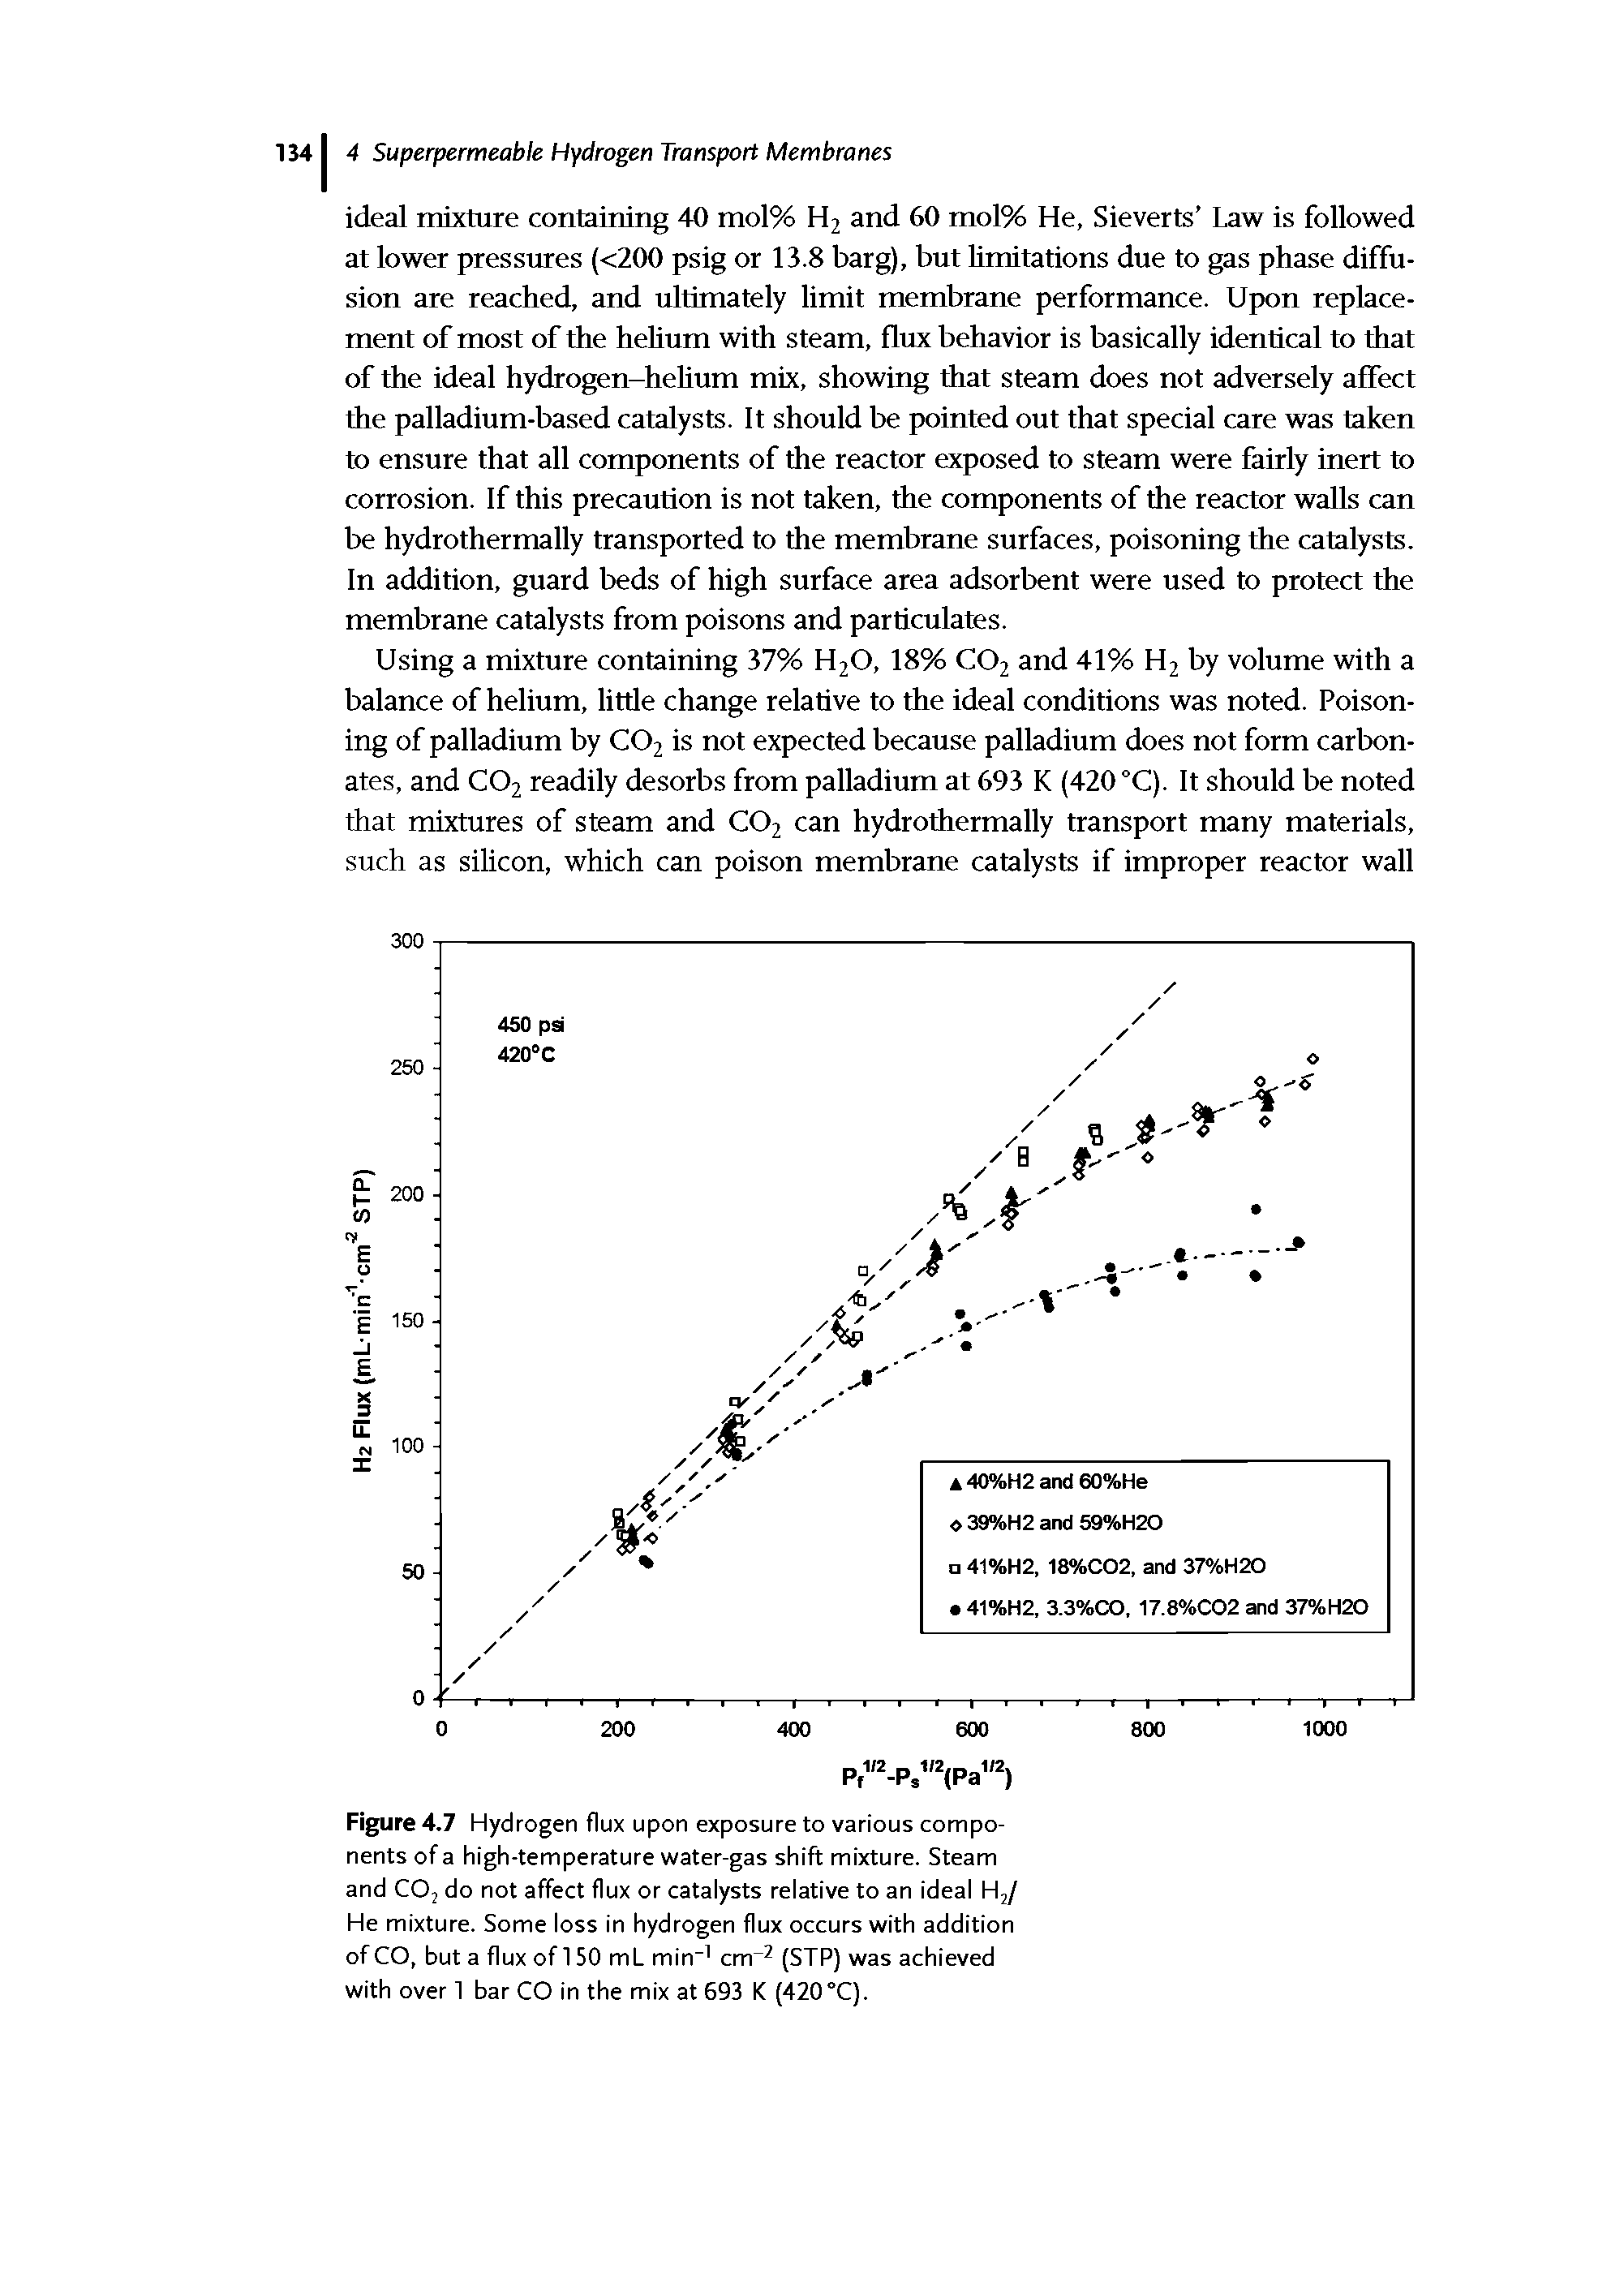 Figure 4.7 Hydrogen flux upon exposure to various components of a high-temperature water-gas shift mixture. Steam and CO do not affect flux or catalysts relative to an ideal H / He mixture. Some loss in hydrogen flux occurs with addition of CO, but a flux of 150 mL min" cm" (STP) was achieved with over 1 bar CO in the mix at 693 K (420°C).